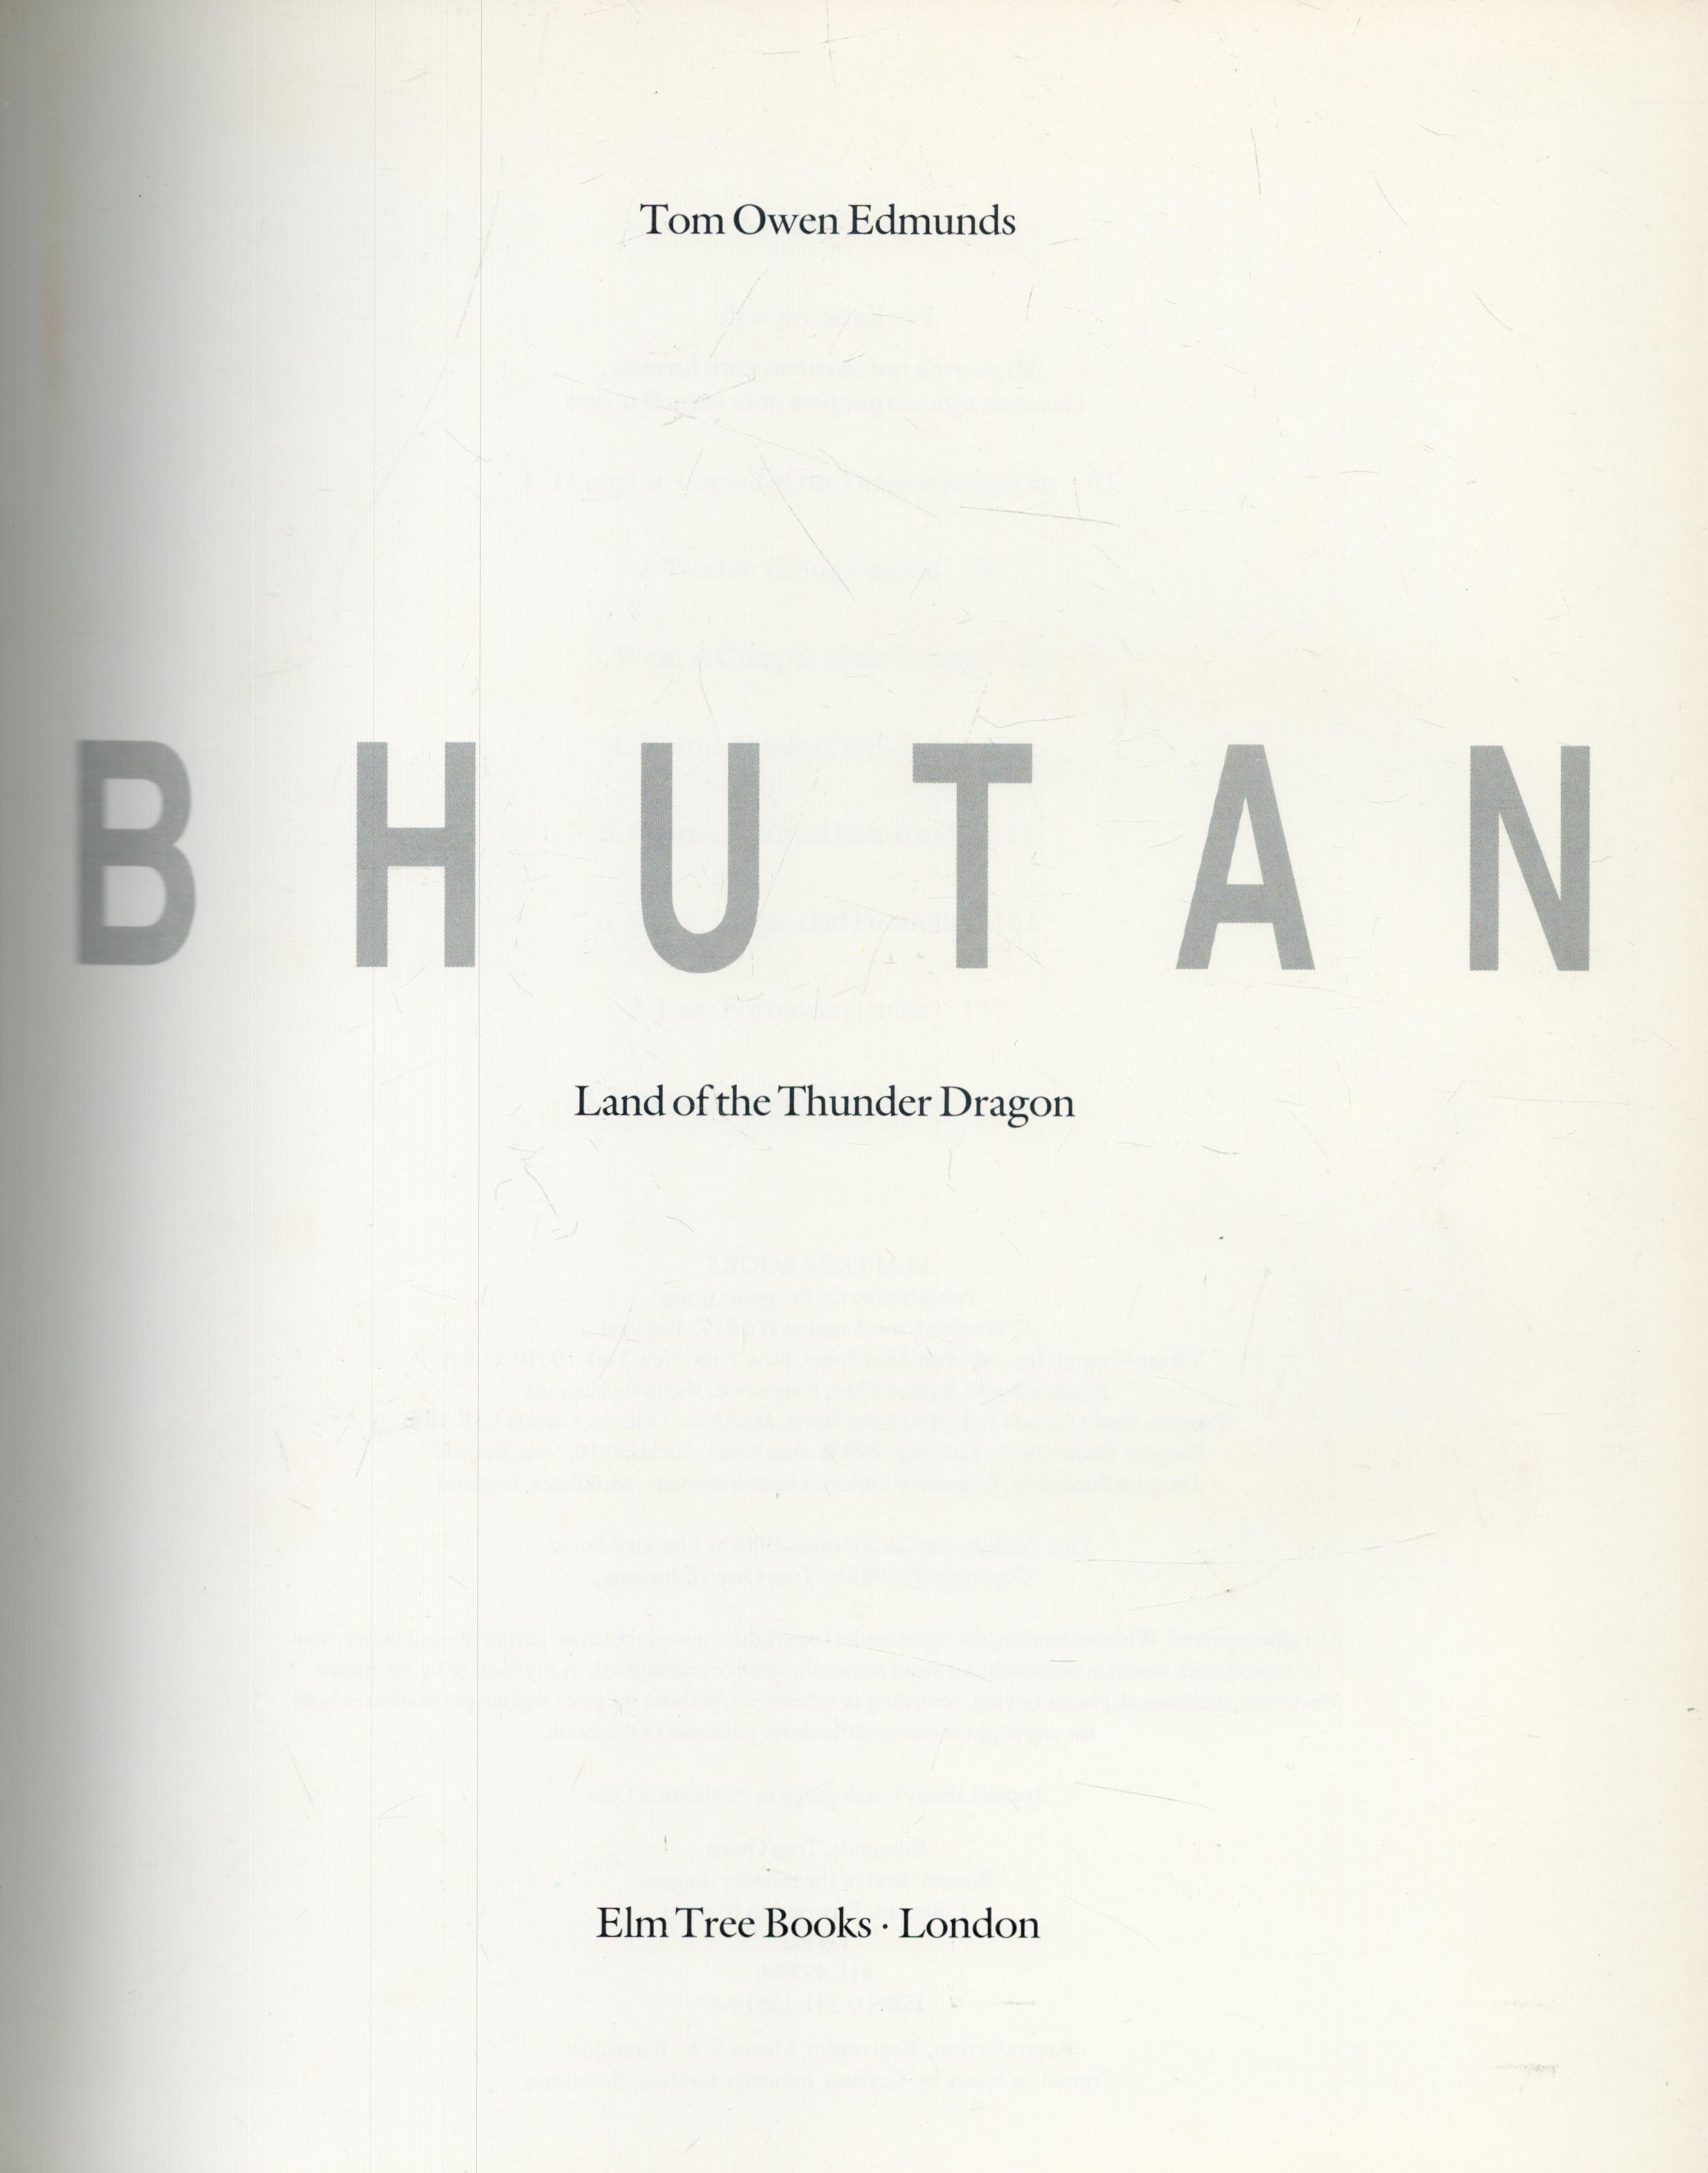 Bhutan Land of the Thunder Dragon by Tom Owen Edmunds 1988 hardback book with 160 pages, some - Image 2 of 3